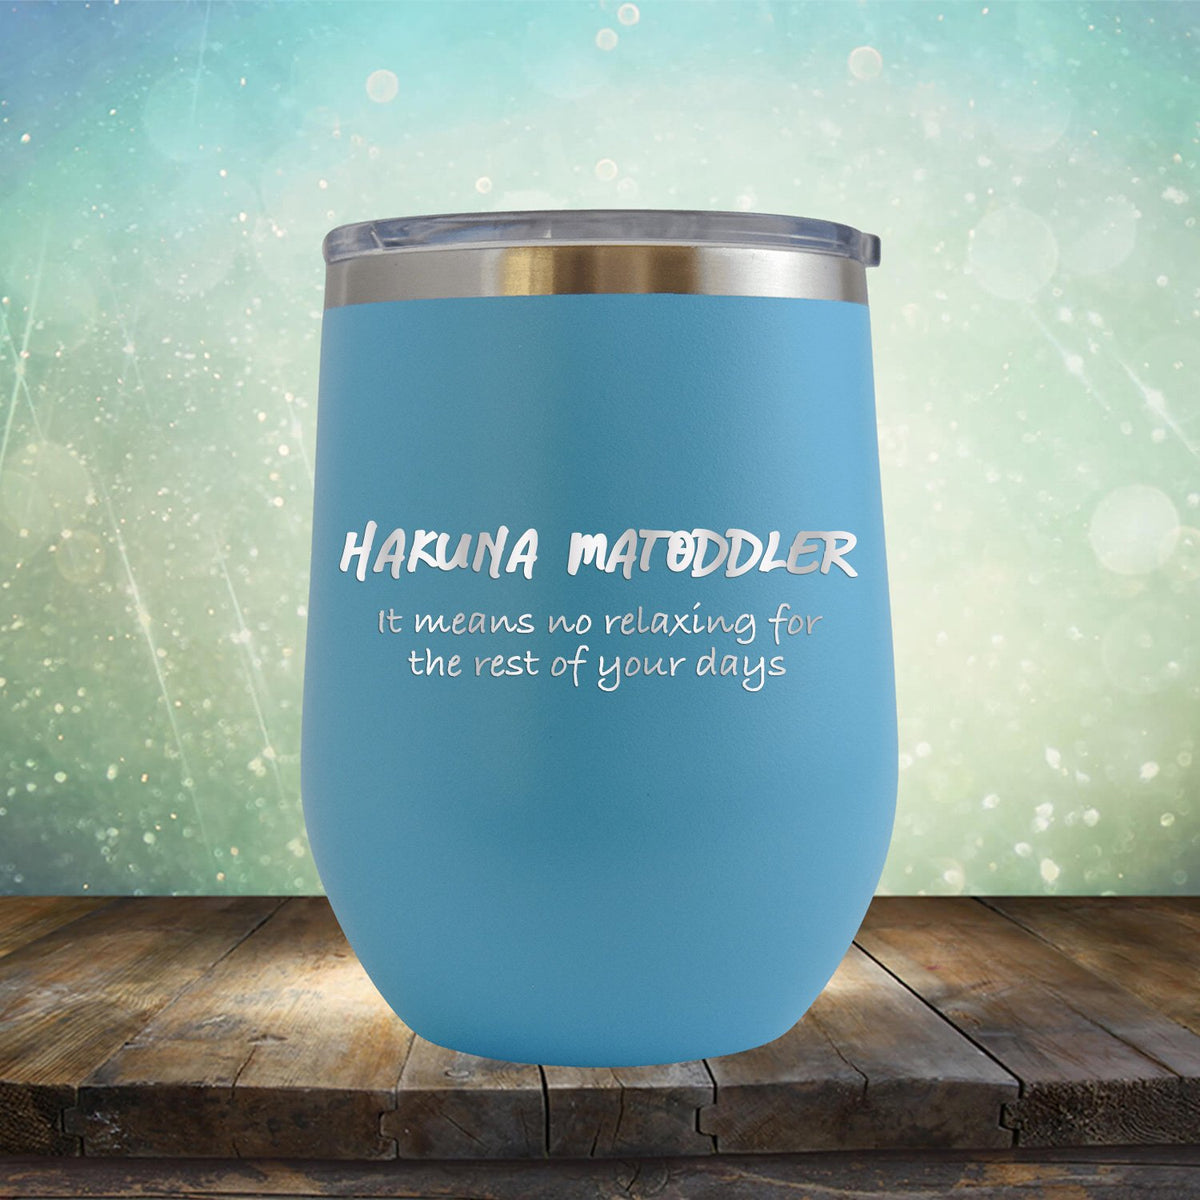 Hakuna Matoddler Means No Relaxing - Stemless Wine Cup